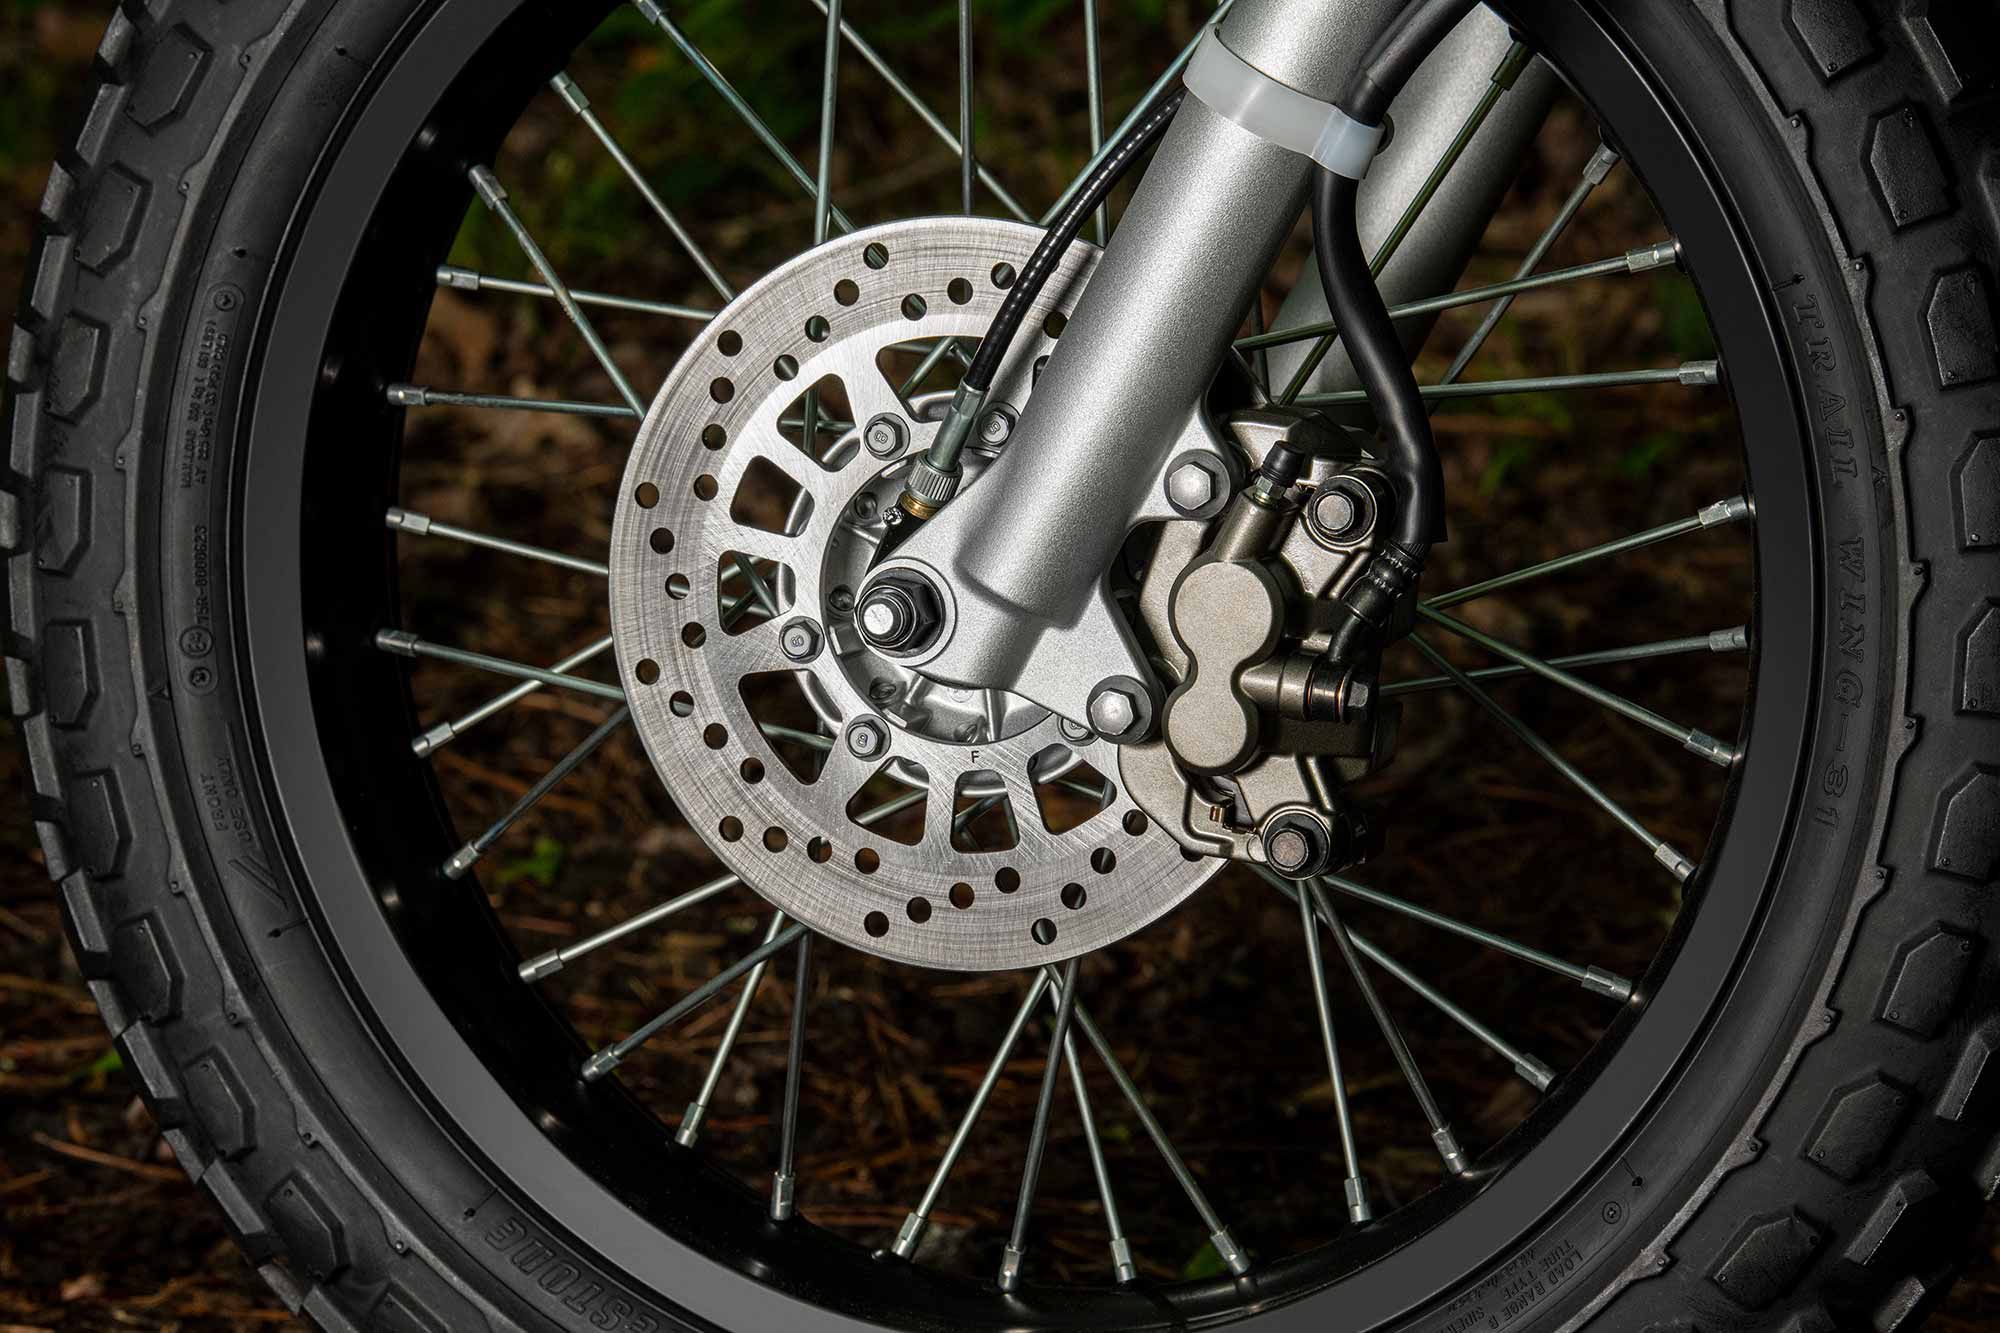 A single 220mm disc and 110mm drum brake help slow the fat-tire dual sport.